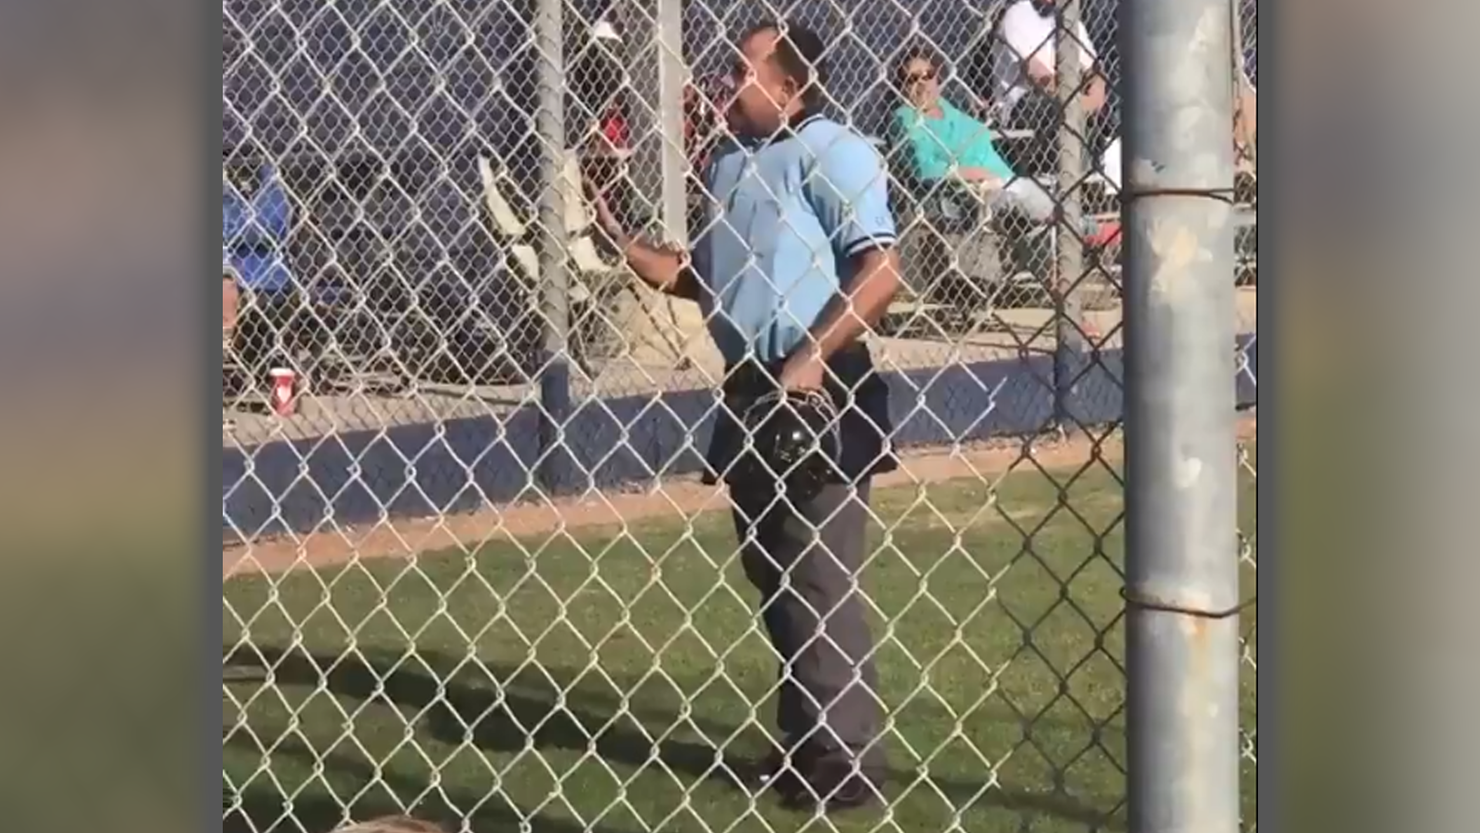 Umpire walks away from little league game after 